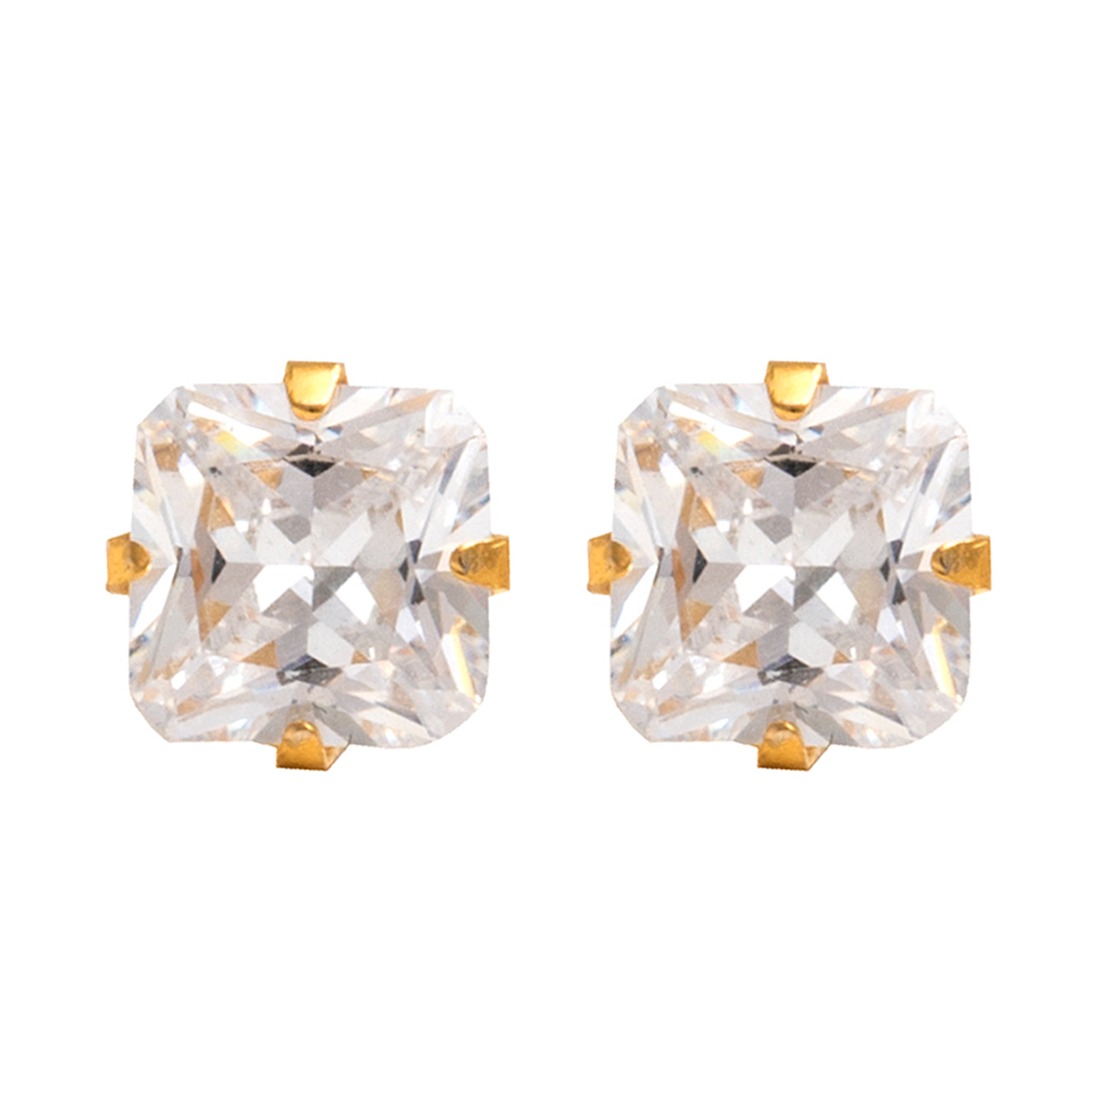 4*4MM - Princess Cut Cubic Zirconia - (Square) | 24K Gold Plated Piercing Earrings with Ear Piercing Cartridge | Studex System75